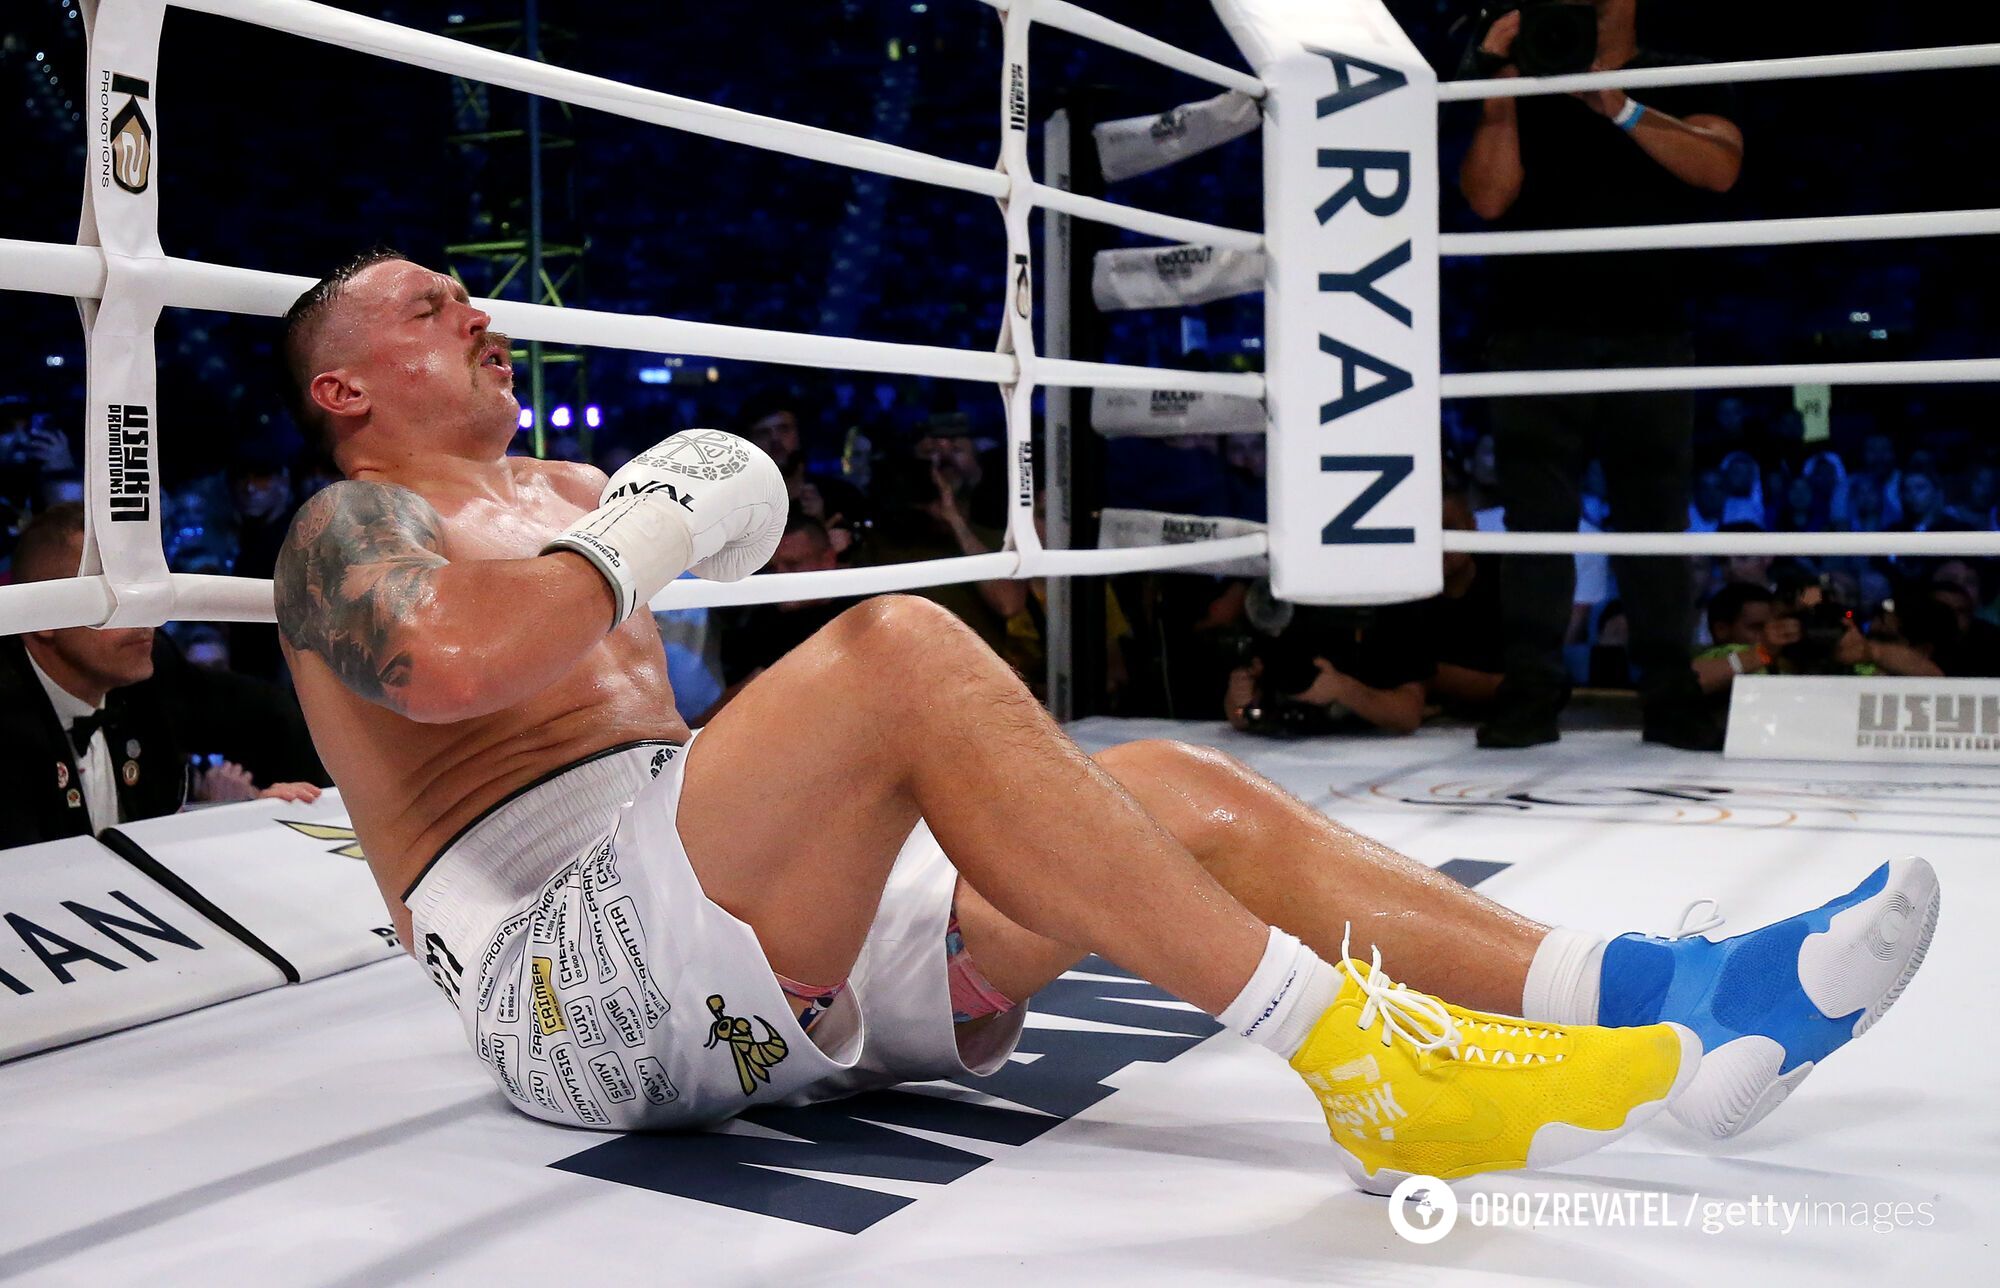 Undisputed facts of deliberate meanness in the fight Usyk - Dubois are presented